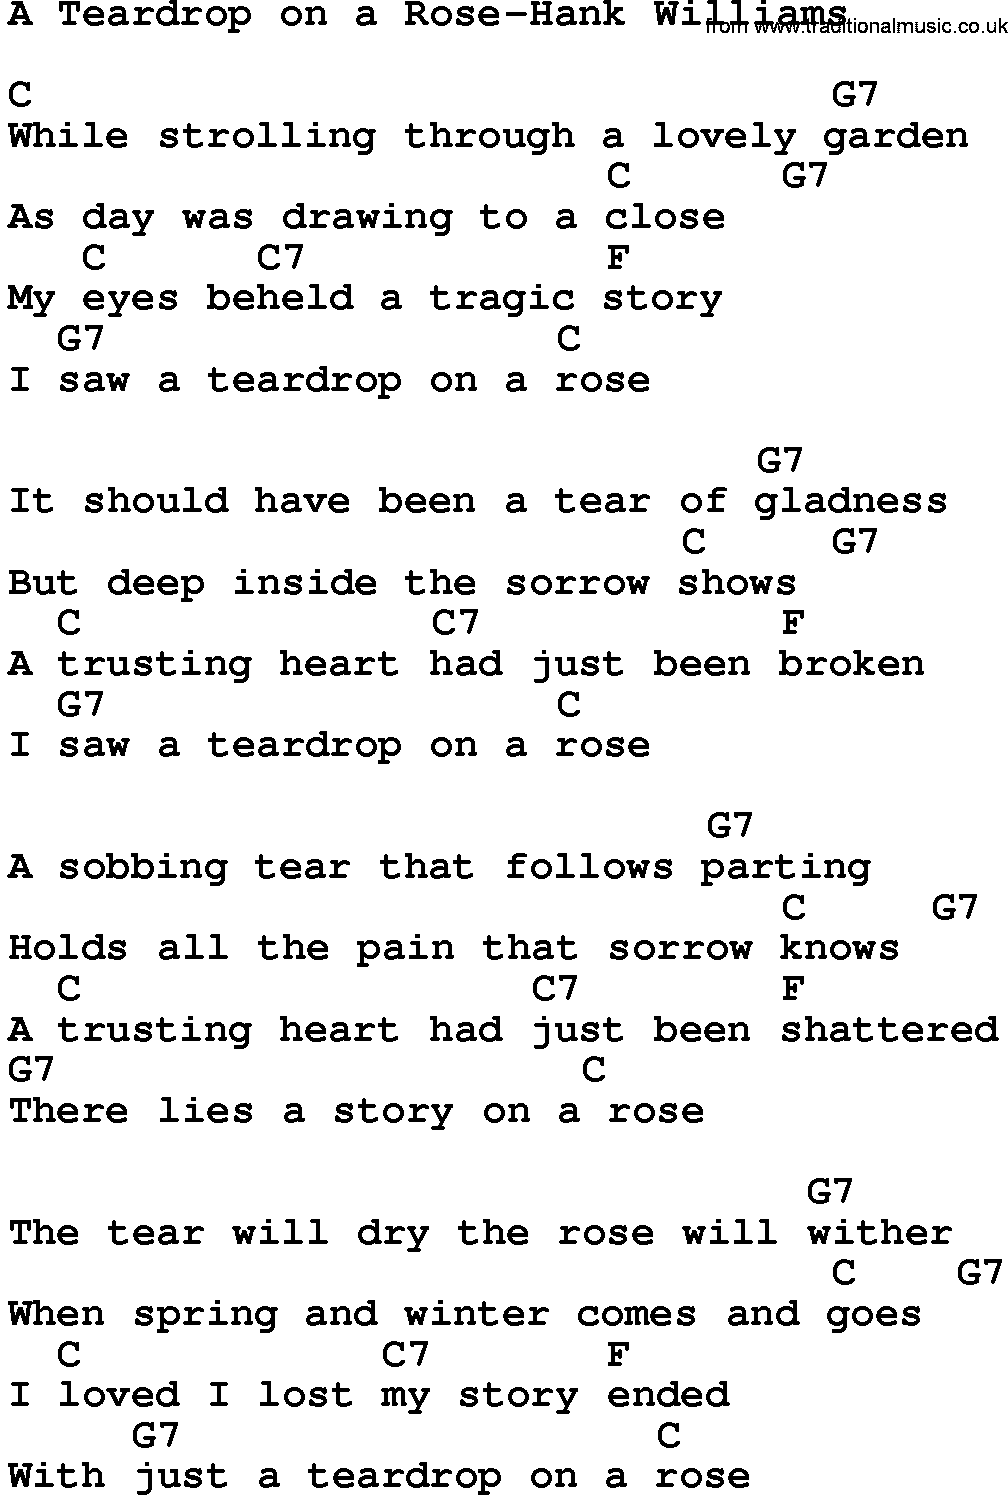 Country music song: A Teardrop On A Rose-Hank Williams lyrics and chords